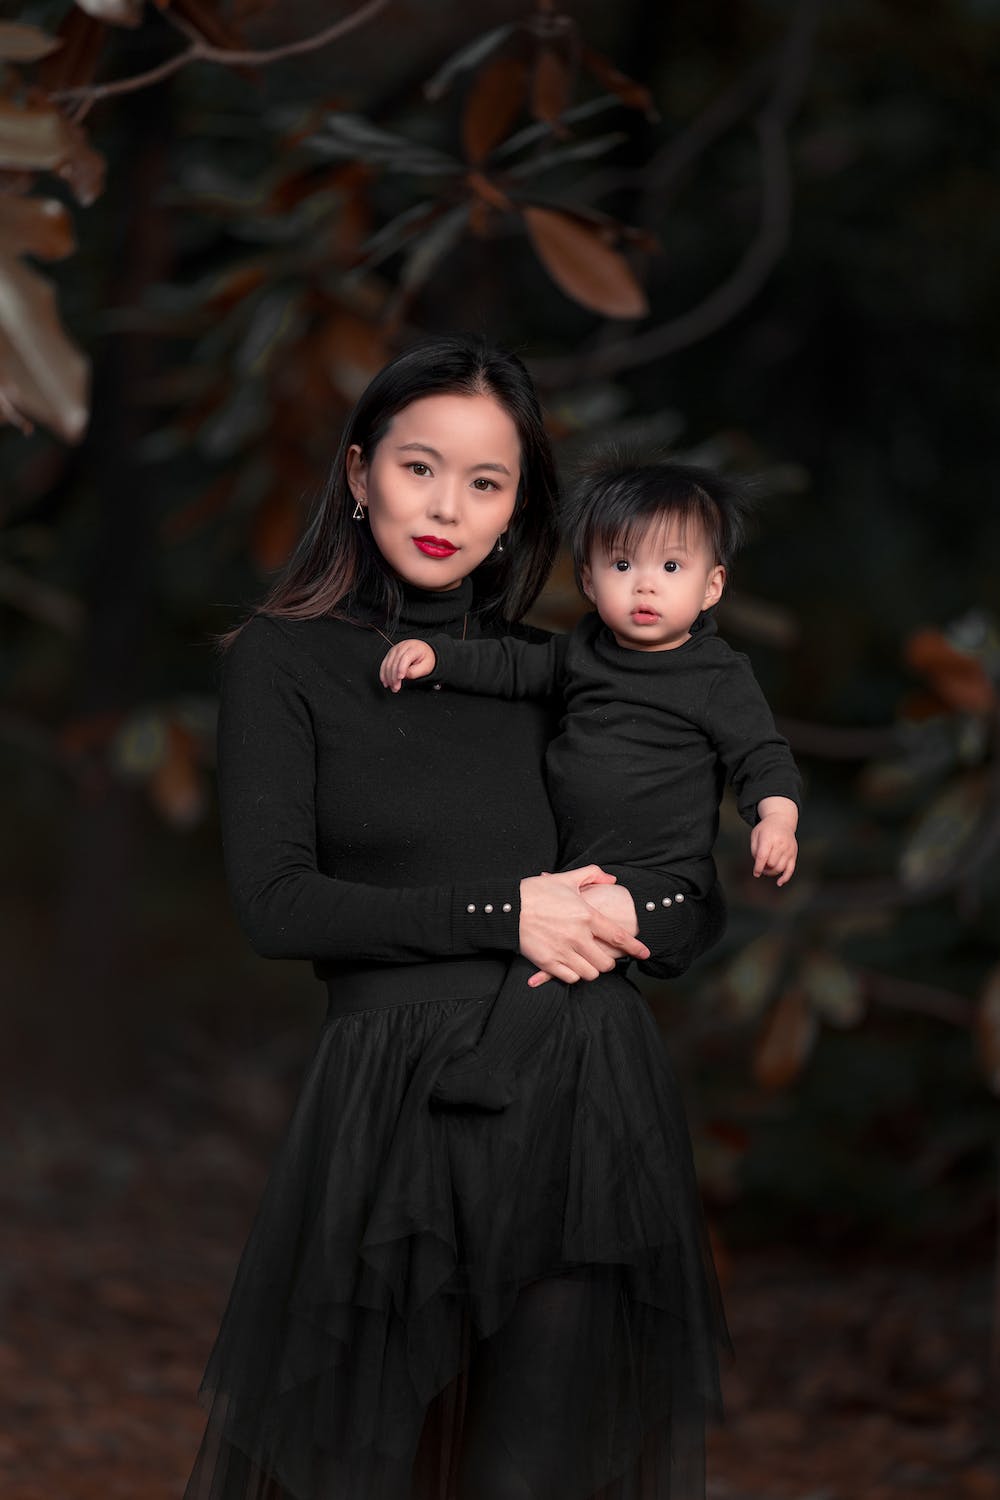 Mother and son dance outfits all black